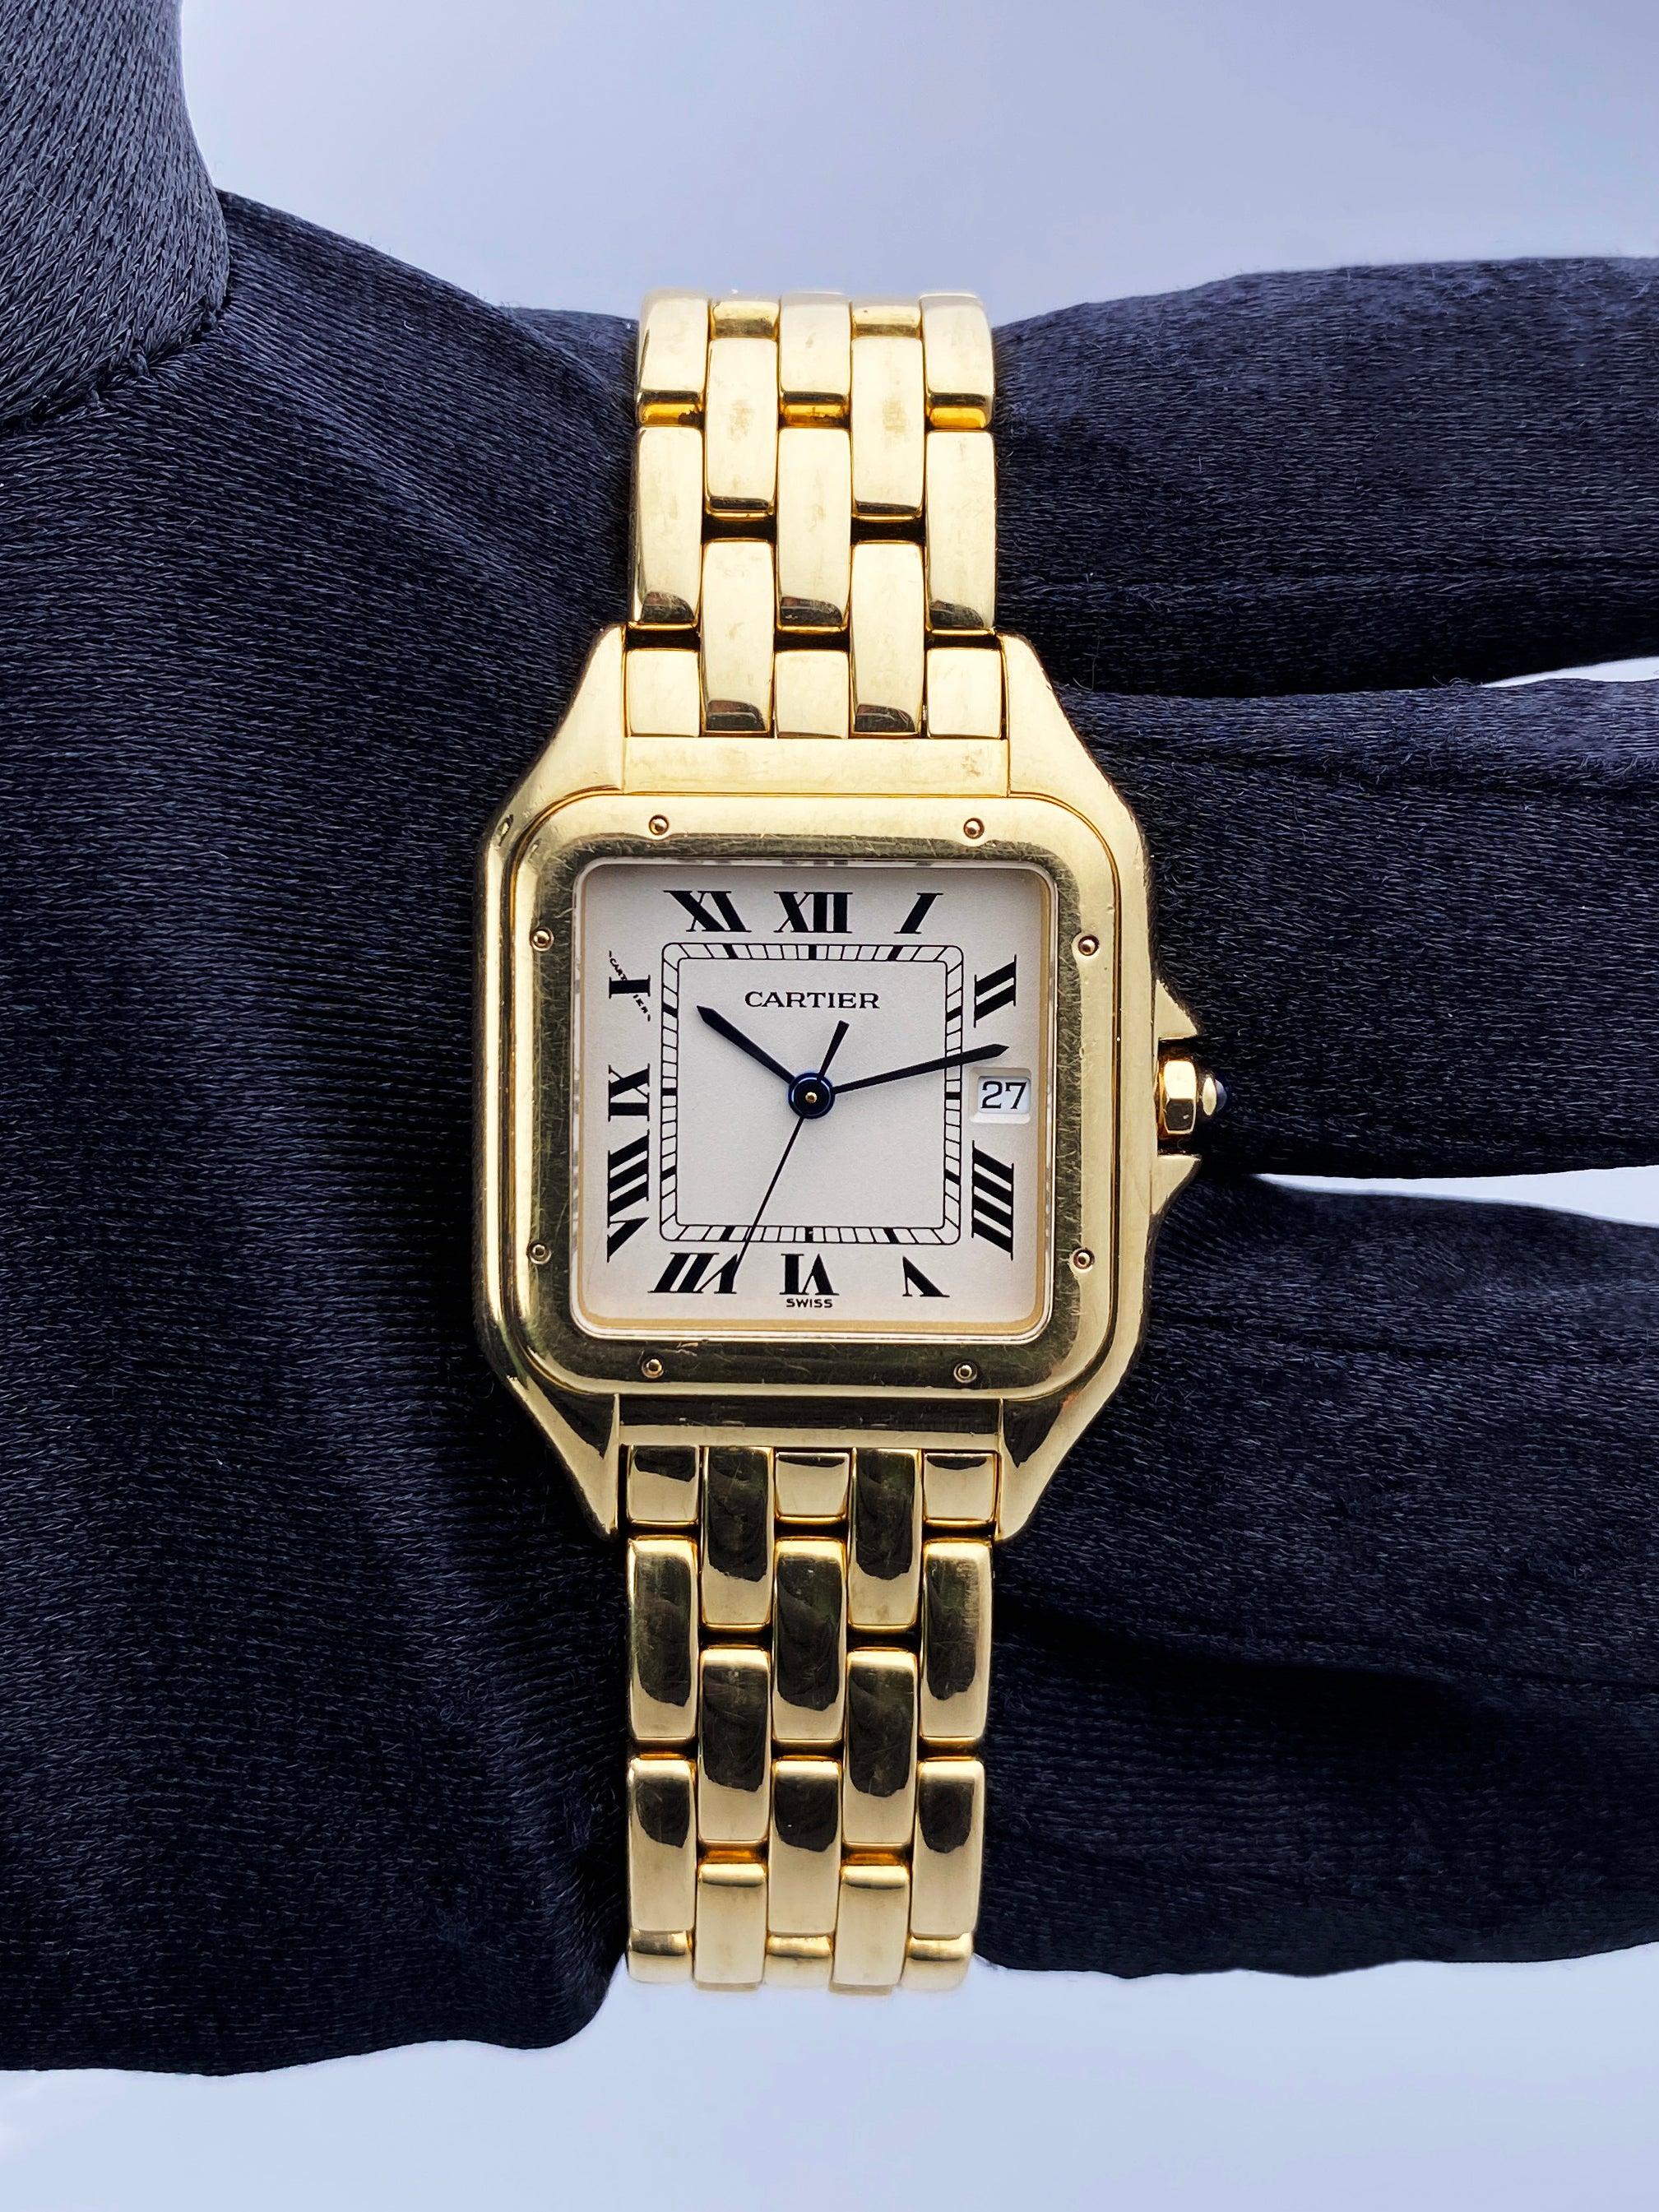 Cartier Panthere Large W25014B9 Mens Watch. 29mm 18K yellow case with 18K yellow gold bezel. Off-white dial with blue steel hands and black Roman numeral hour markers. Date display at the 3 o'clock position. Minute markers on the inner dial. 18K